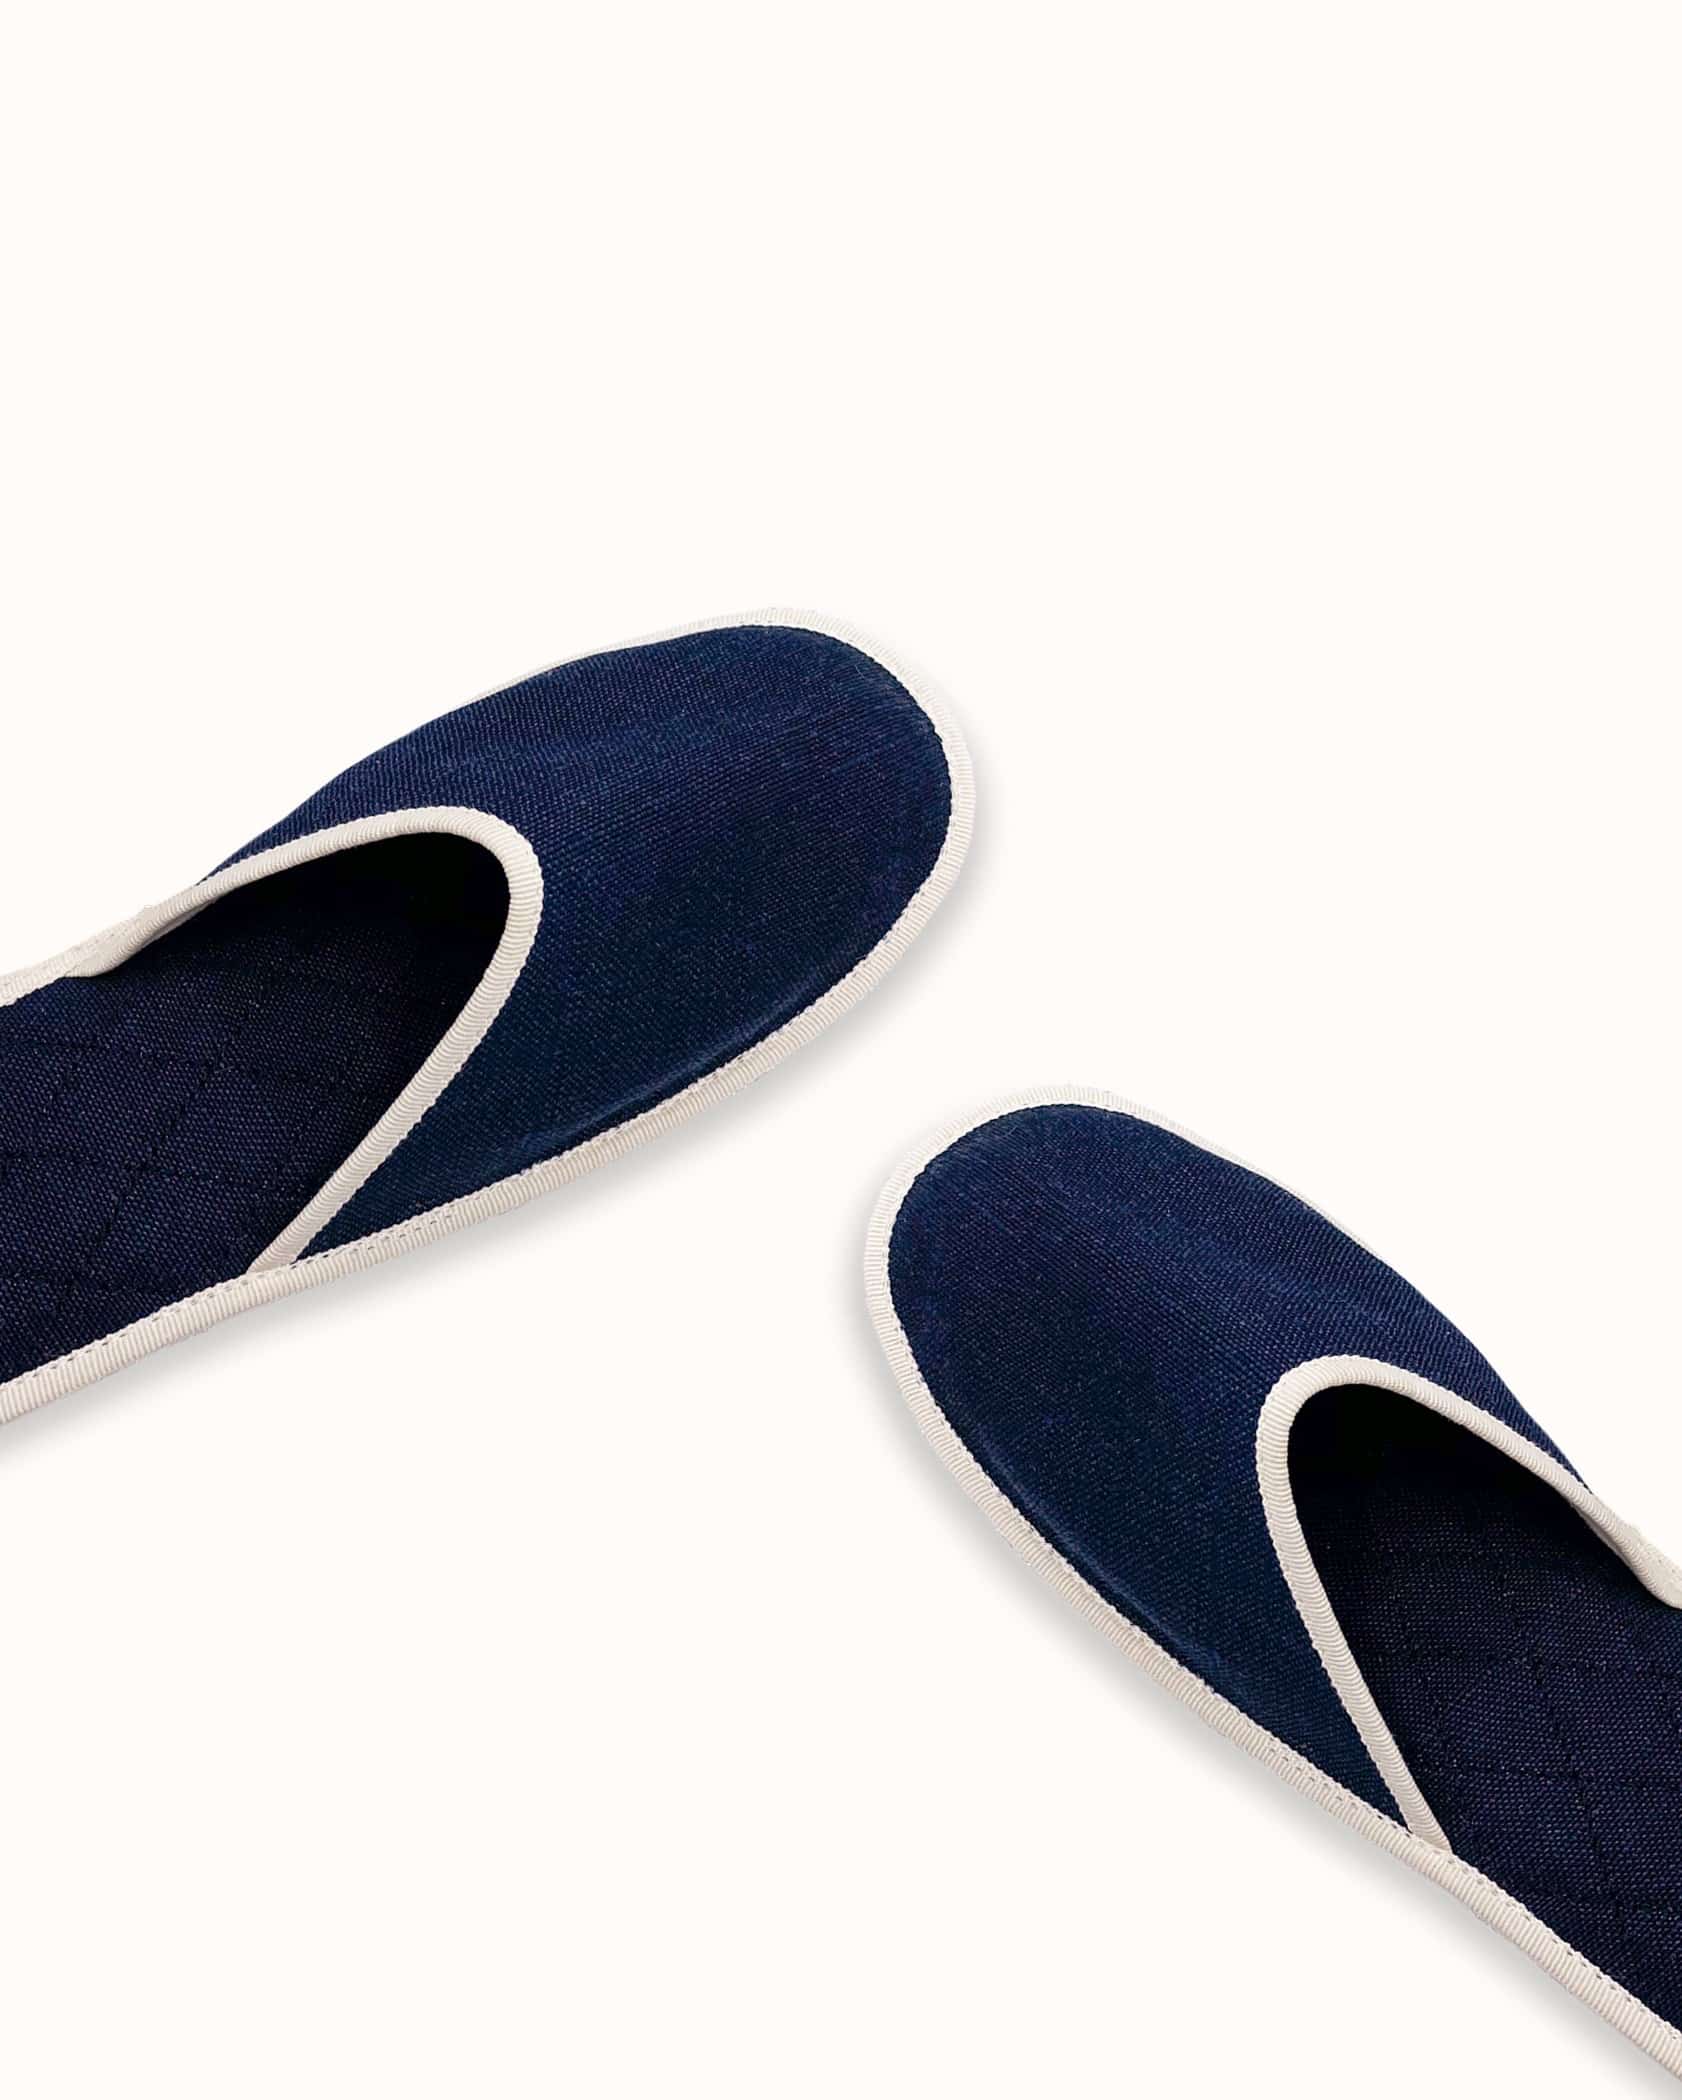 French slippers for men, women and kids. Le Spleen "Heure Exquise", navy blue and white. A slip-on like hotel slippers with a quilted padding and an outstanding craftsmanship manufacturing. Made in France.